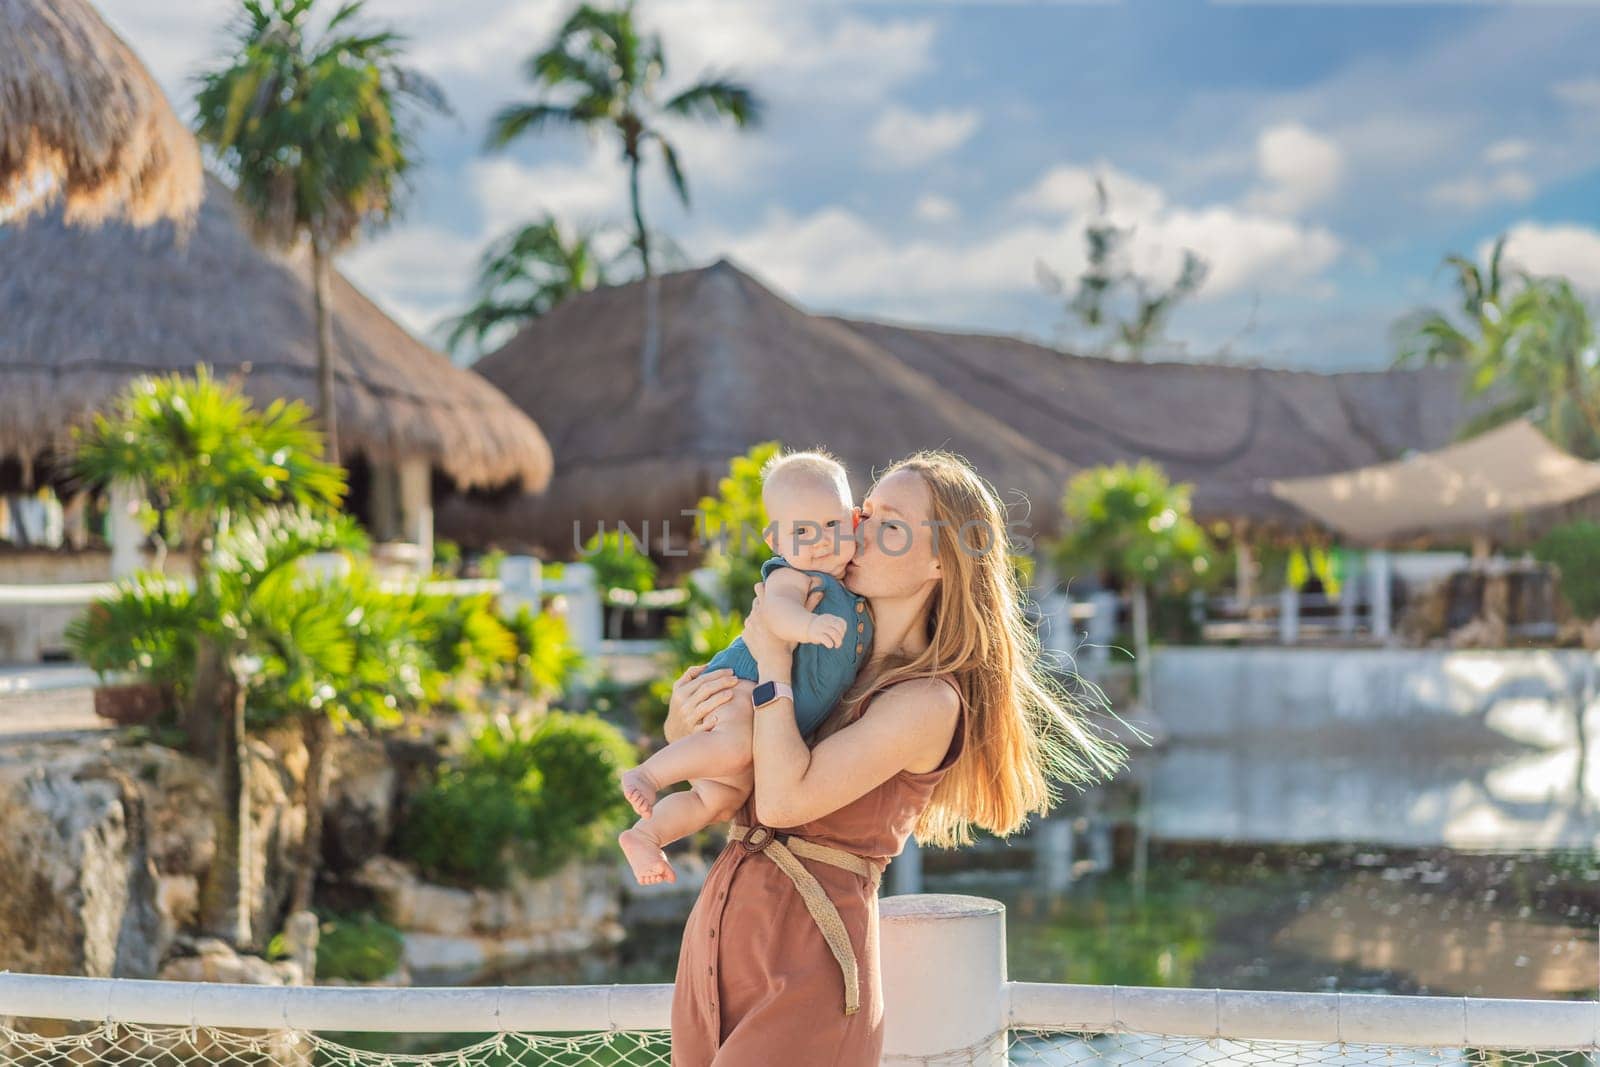 Amidst tropical palms and thatched roofs, a loving mom embraces her baby, sharing warmth and affection in a tranquil outdoor setting by galitskaya